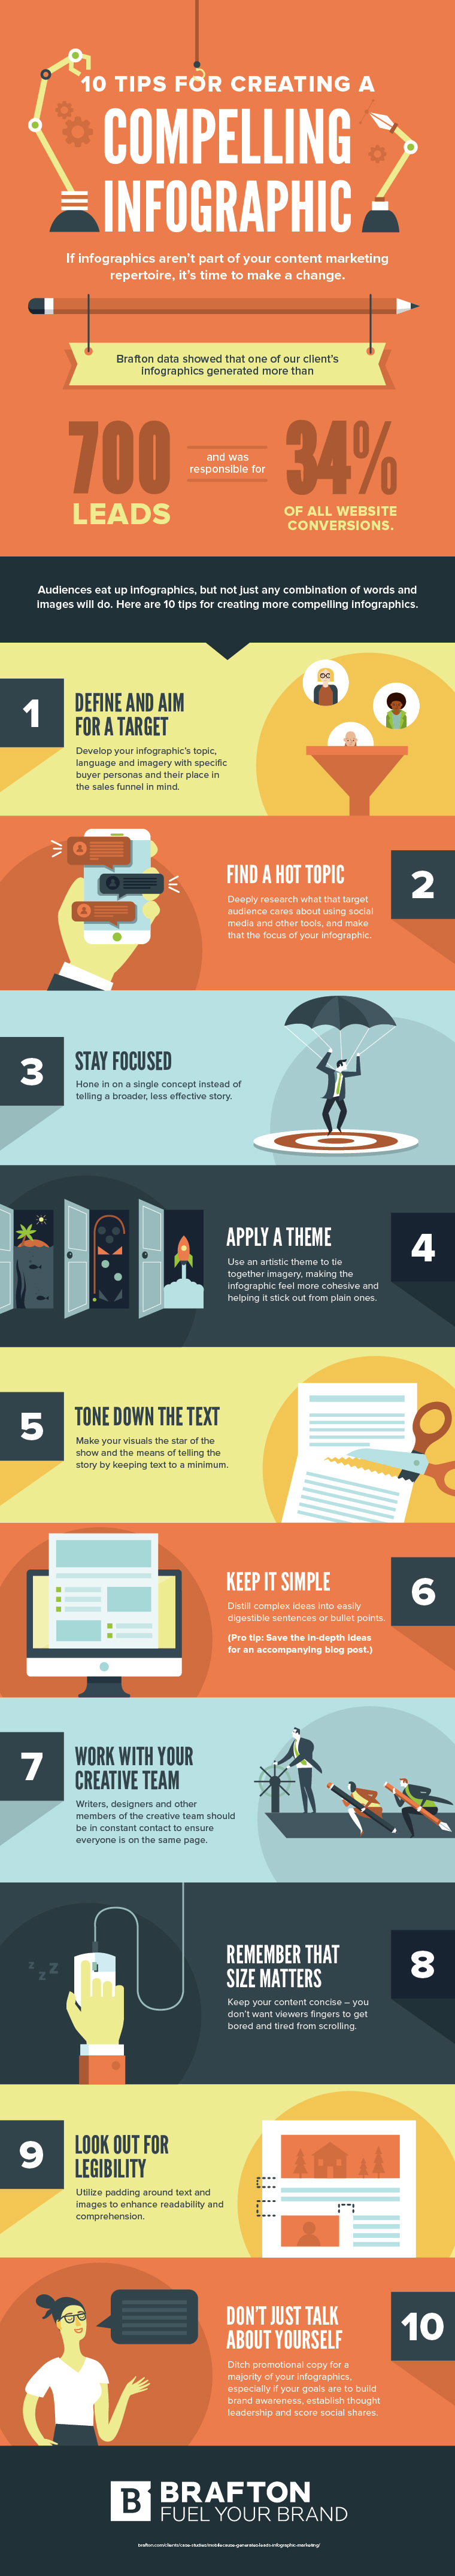 create an infographic infographic